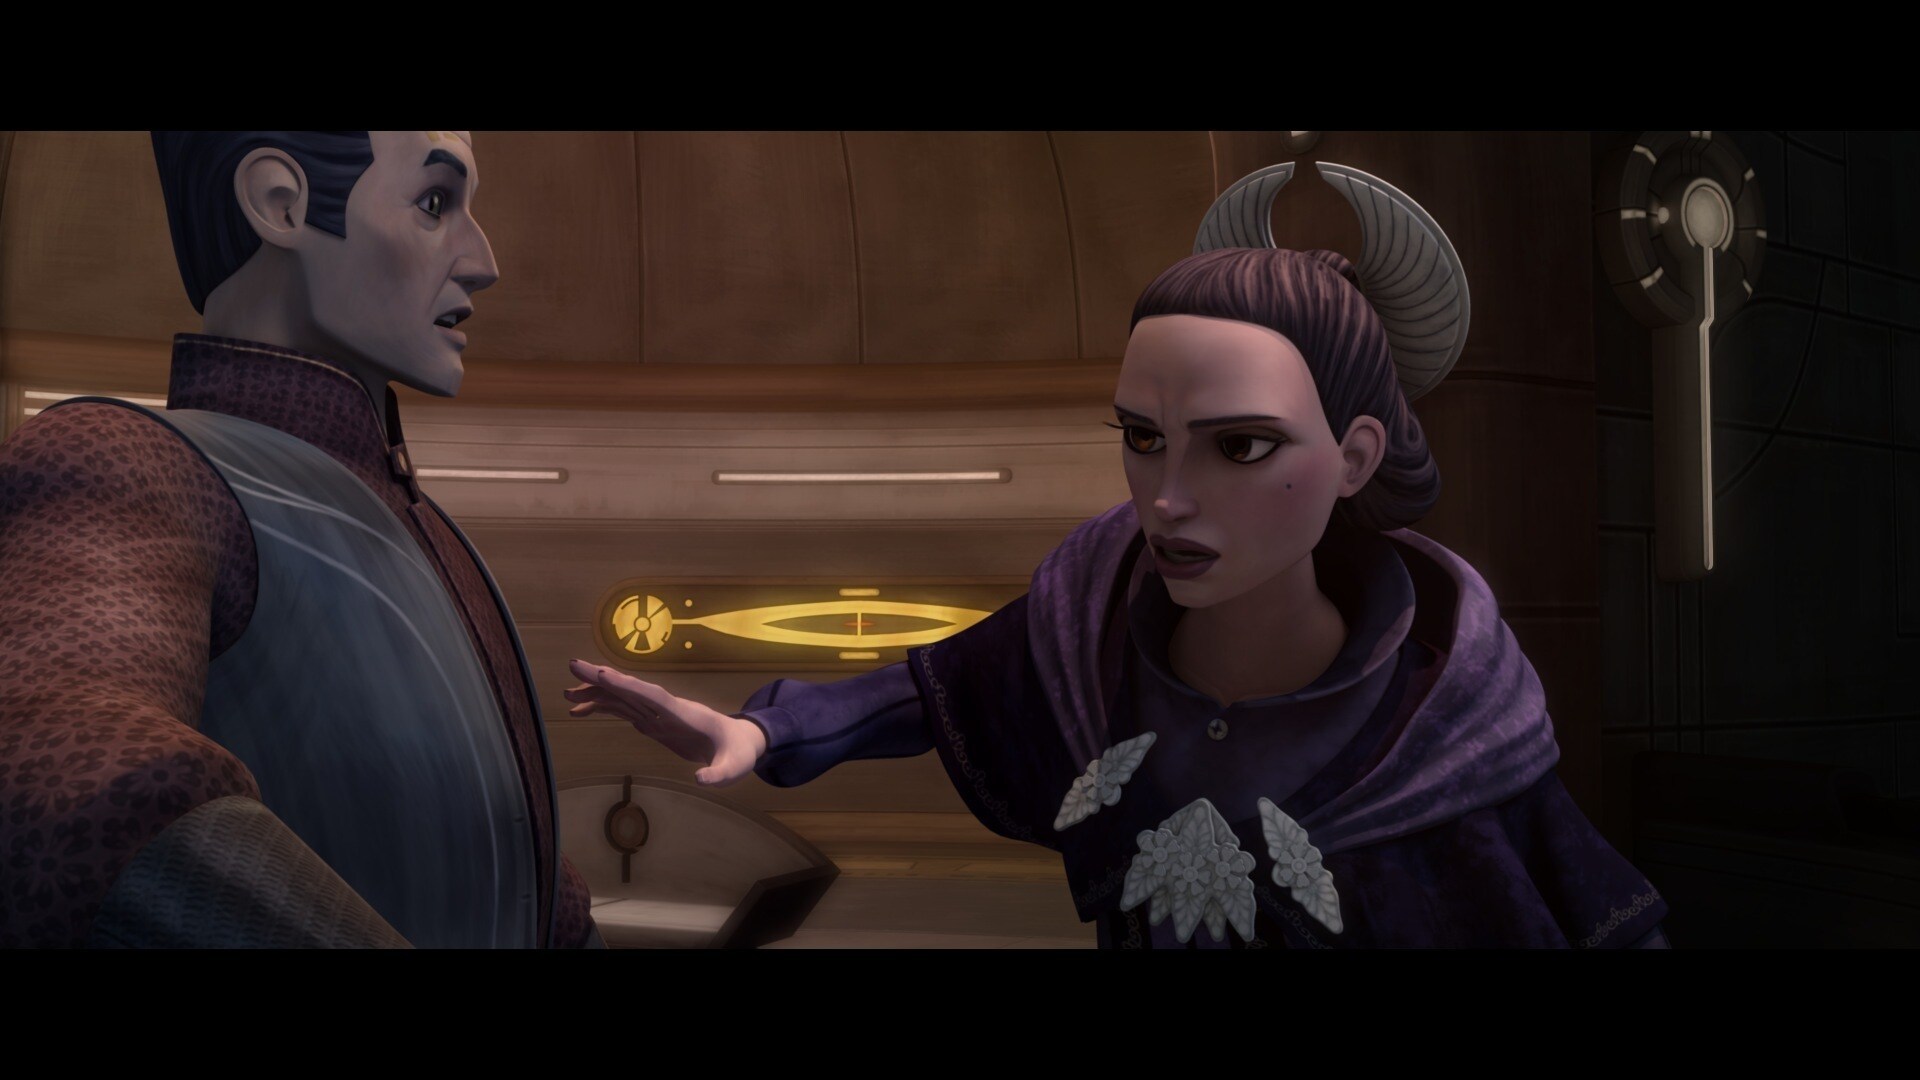 Lesser is surprised that Padmé would have traveled this far, and calls for a special clan represe...